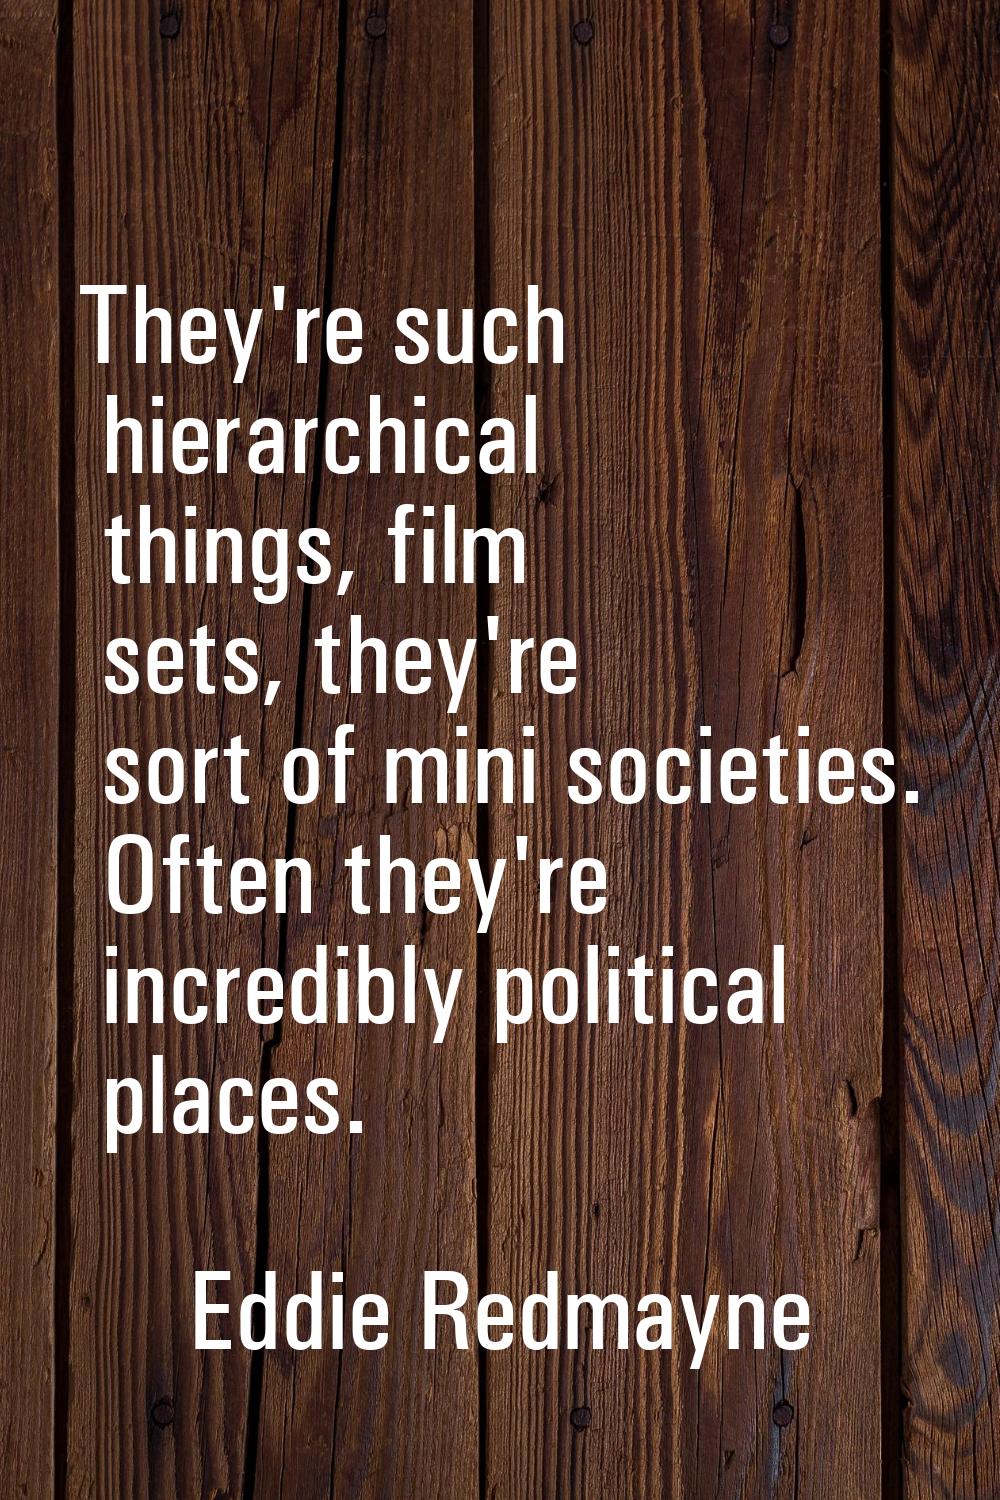 They're such hierarchical things, film sets, they're sort of mini societies. Often they're incredib